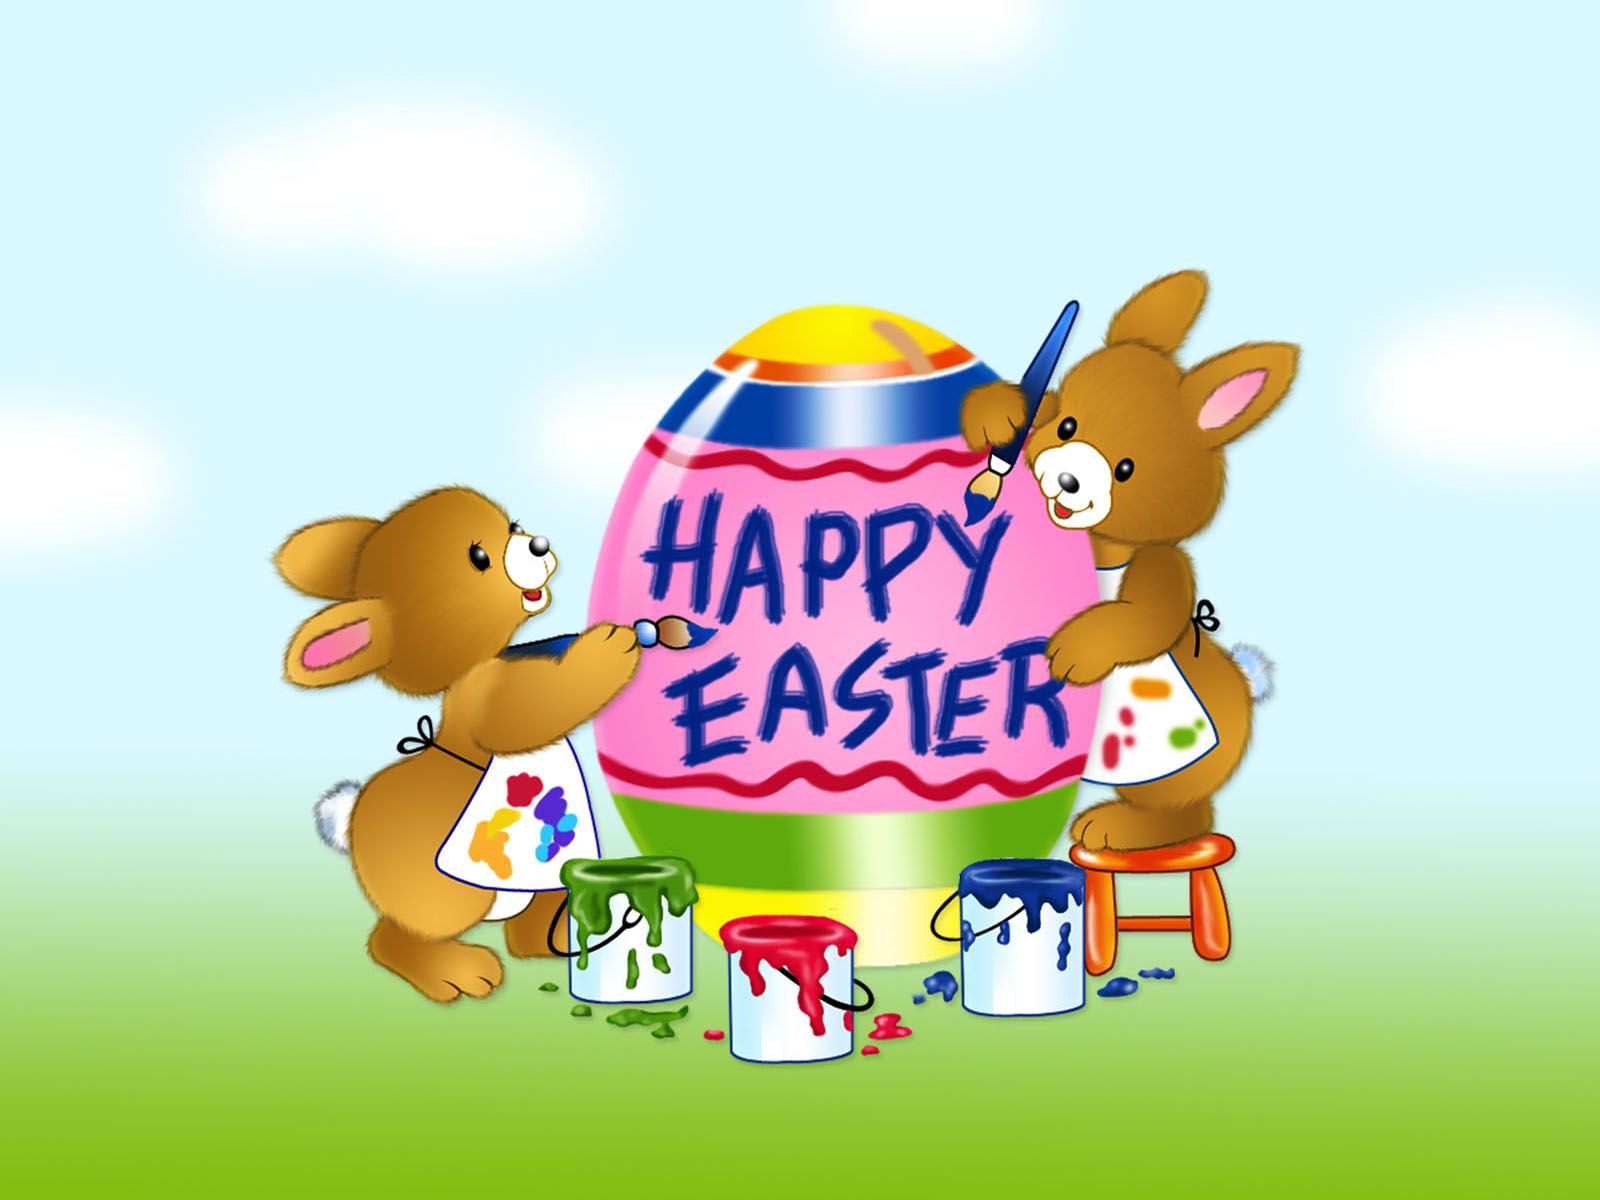 Free Happy Easter Image